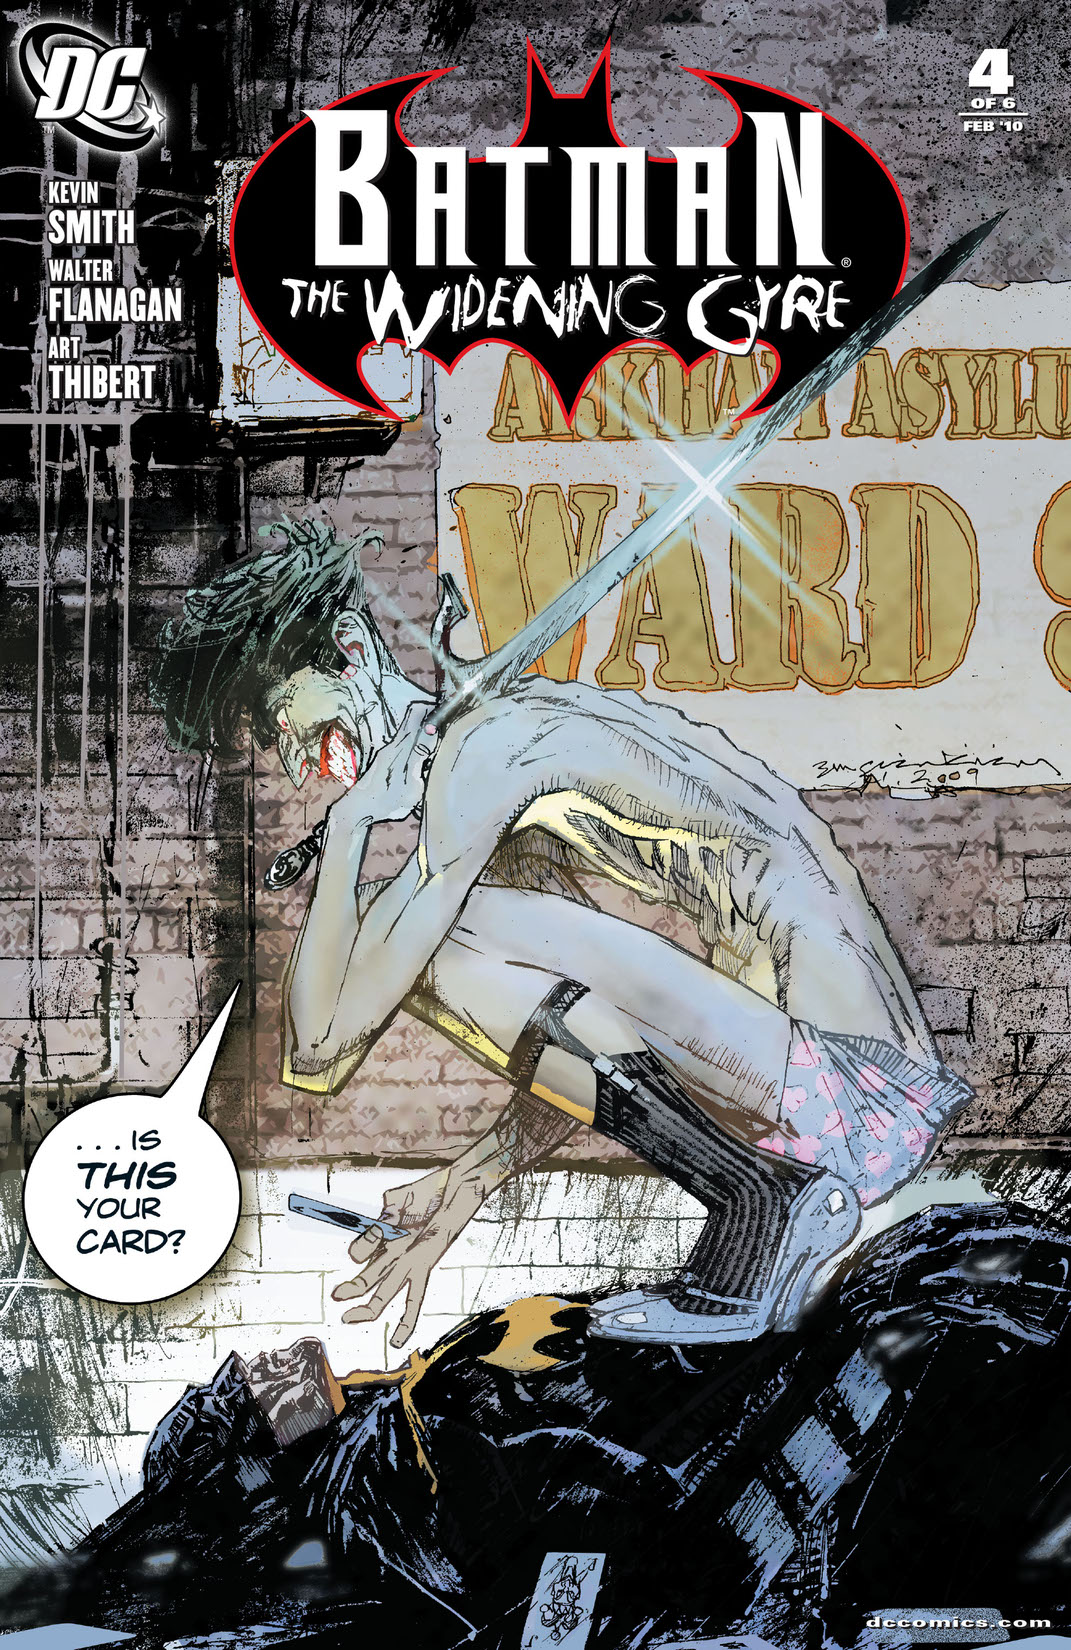 Batman: The Widening Gyre #4 preview images